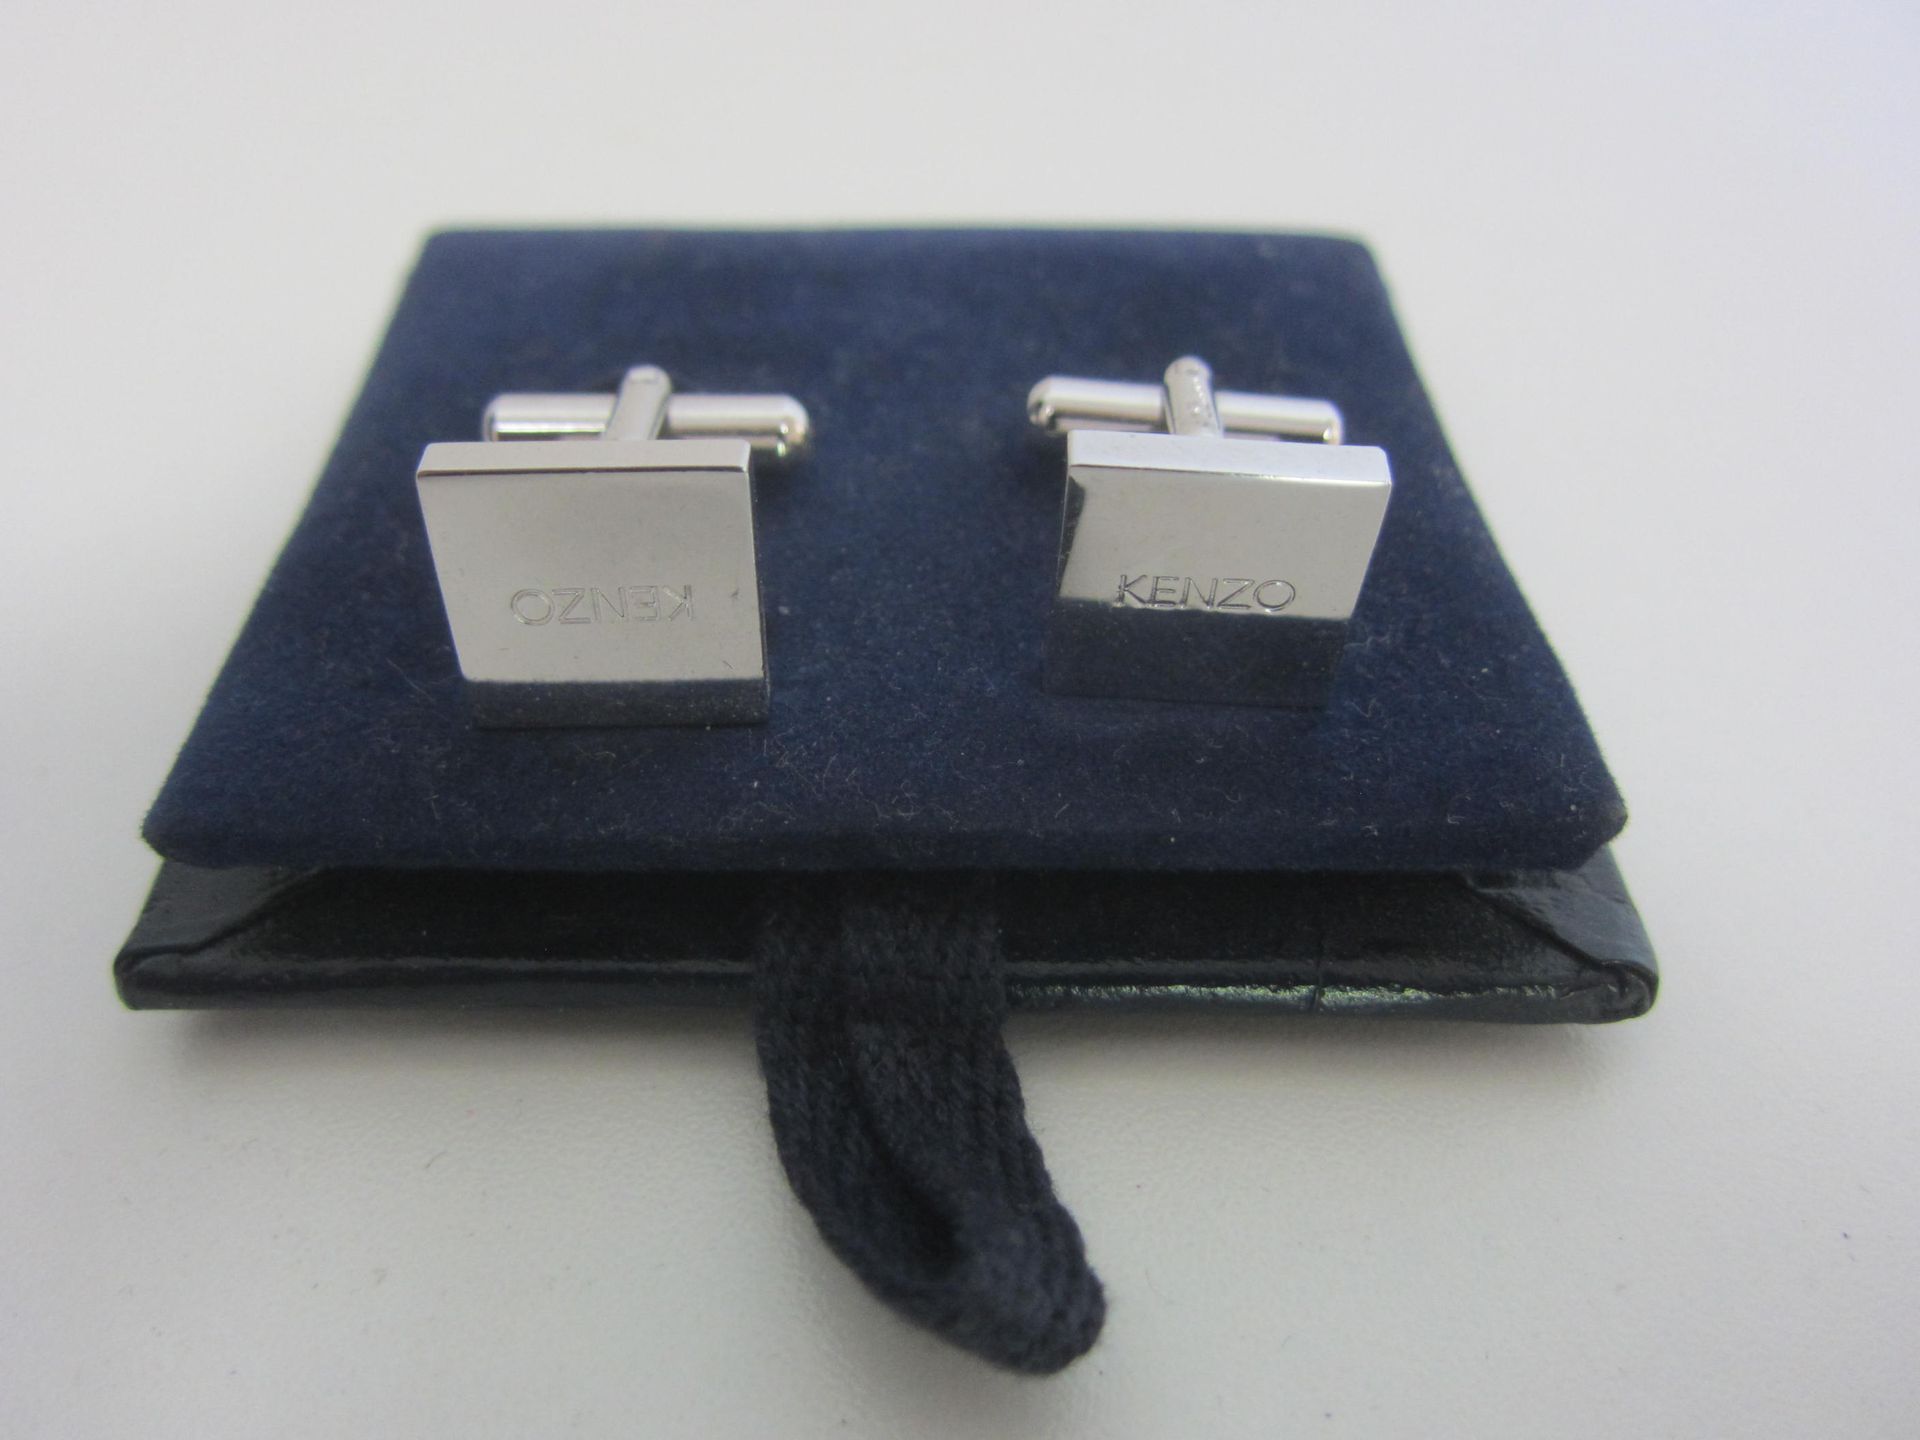 Null KENZO, pair of silver-plated cufflinks, good condition